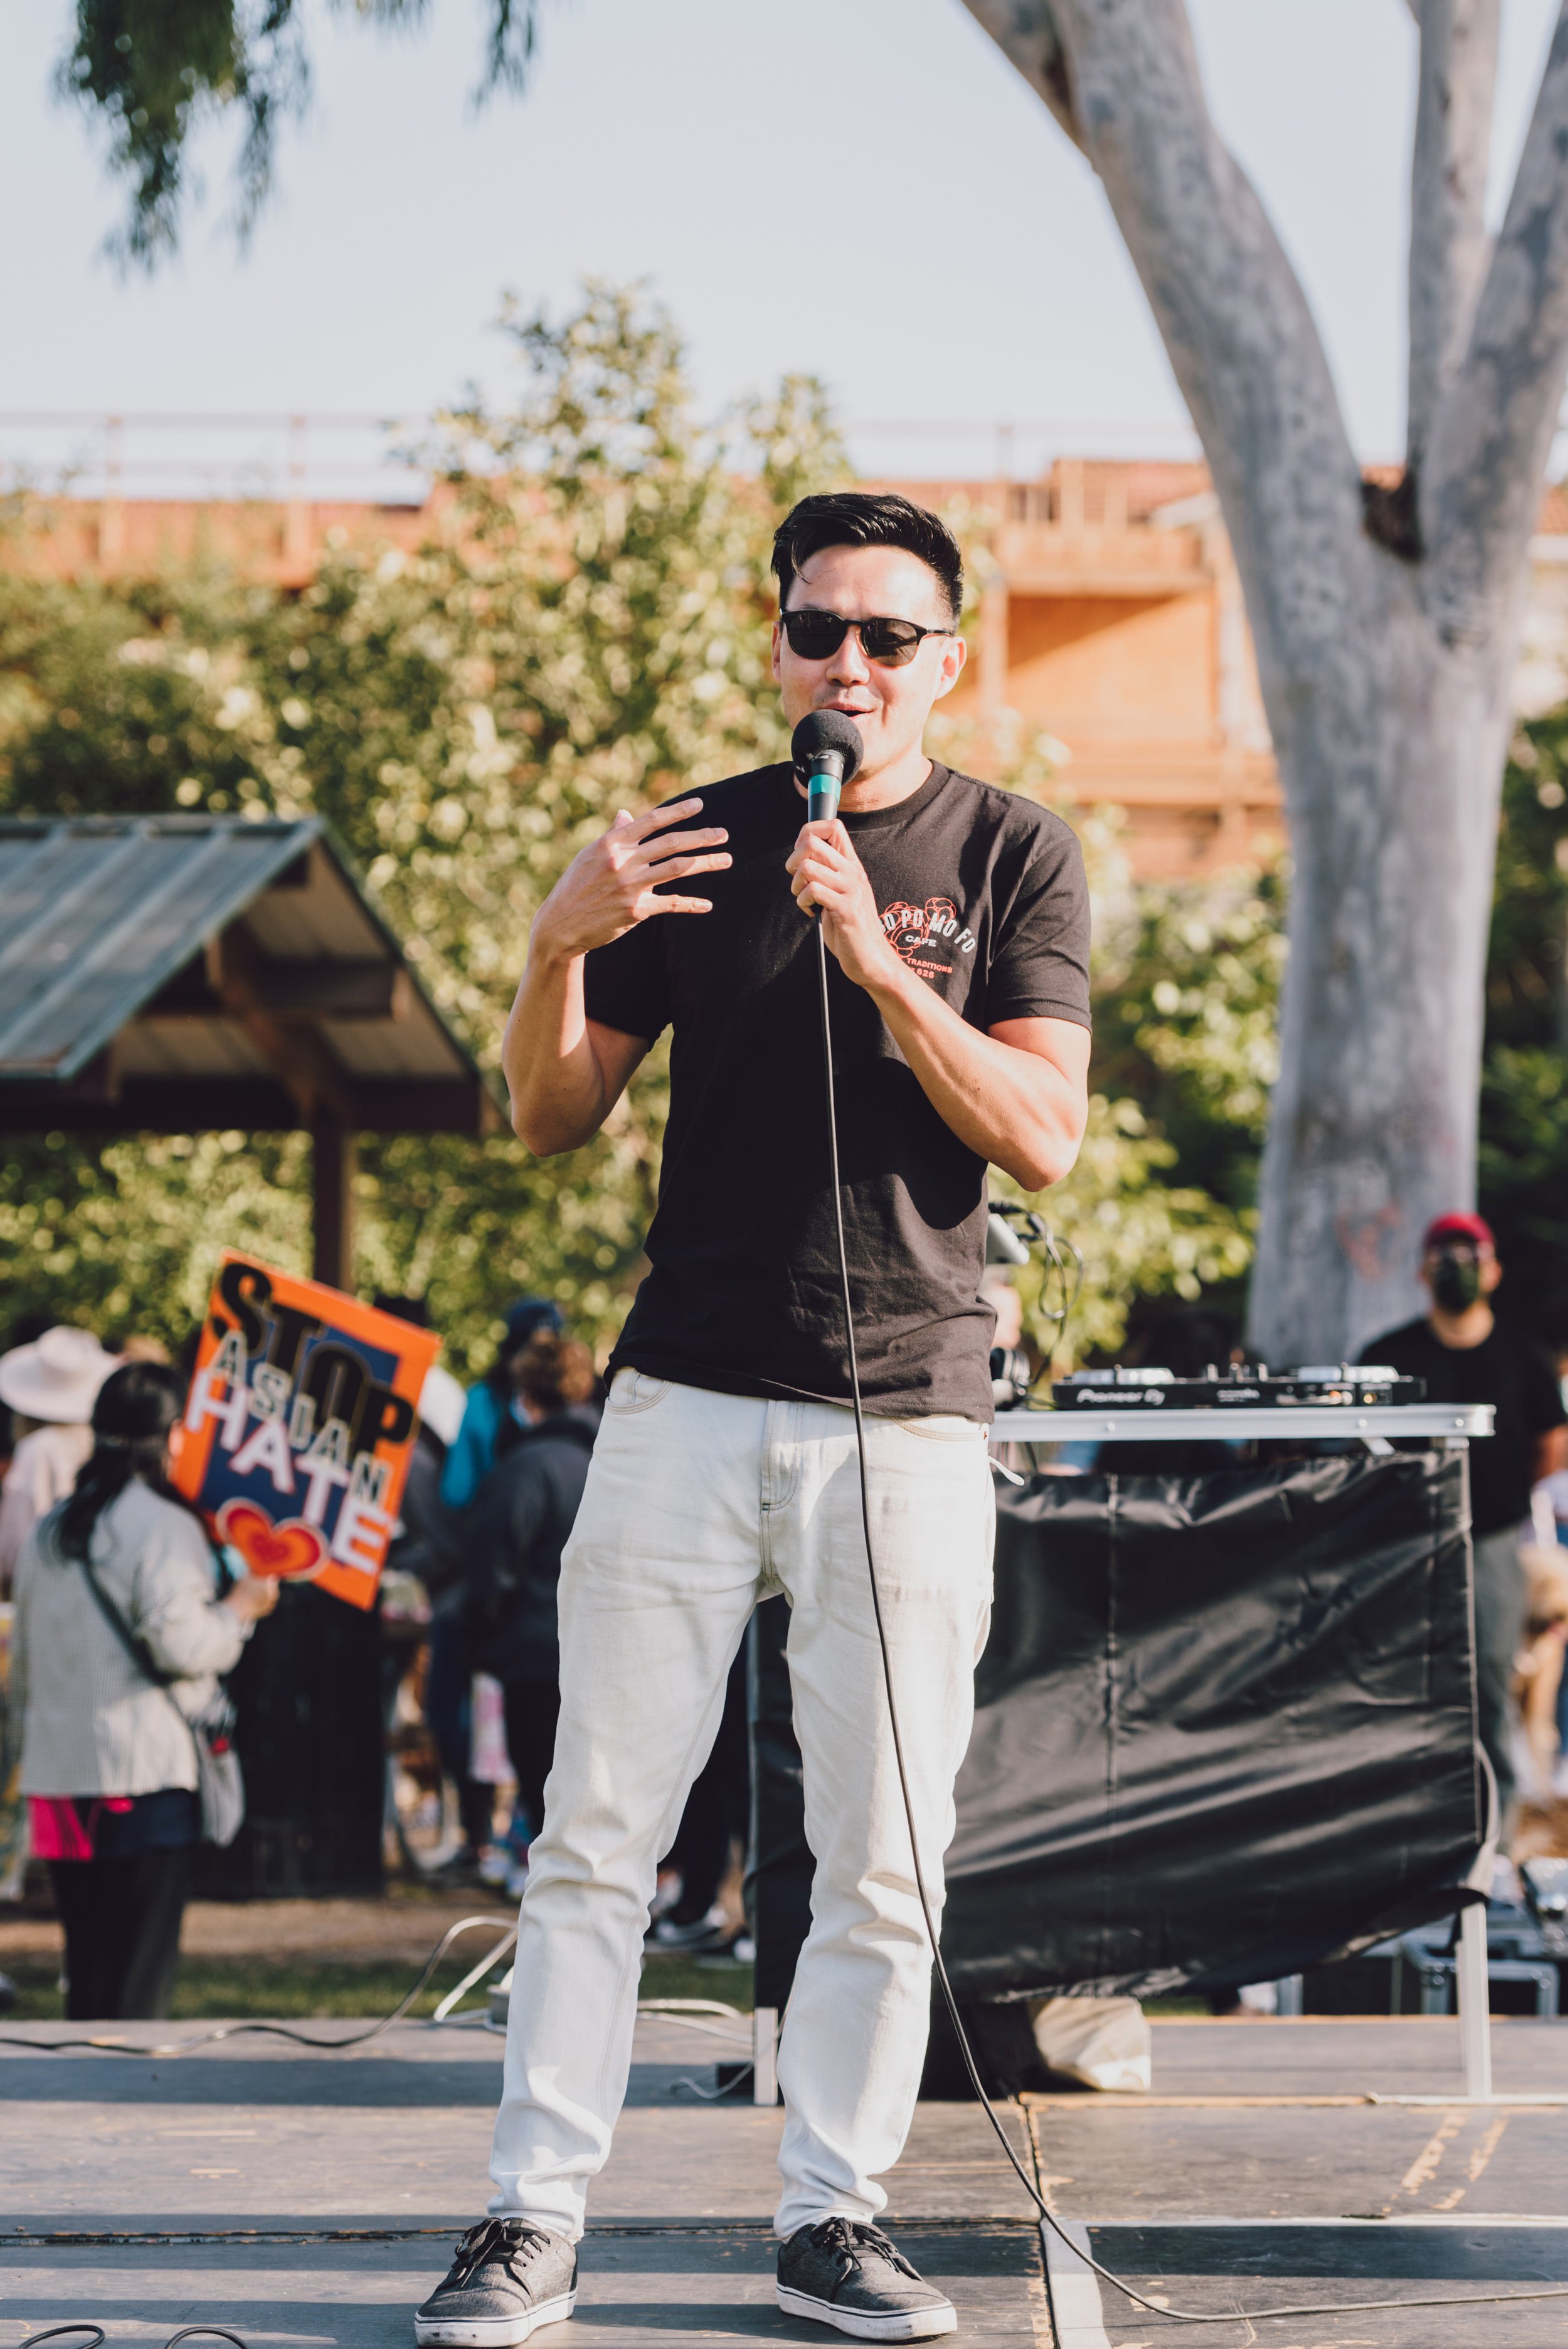 BlocktheHateCommunityRally-Compassion-In-SGV-Alhambra-Event-Photographer-31.jpg